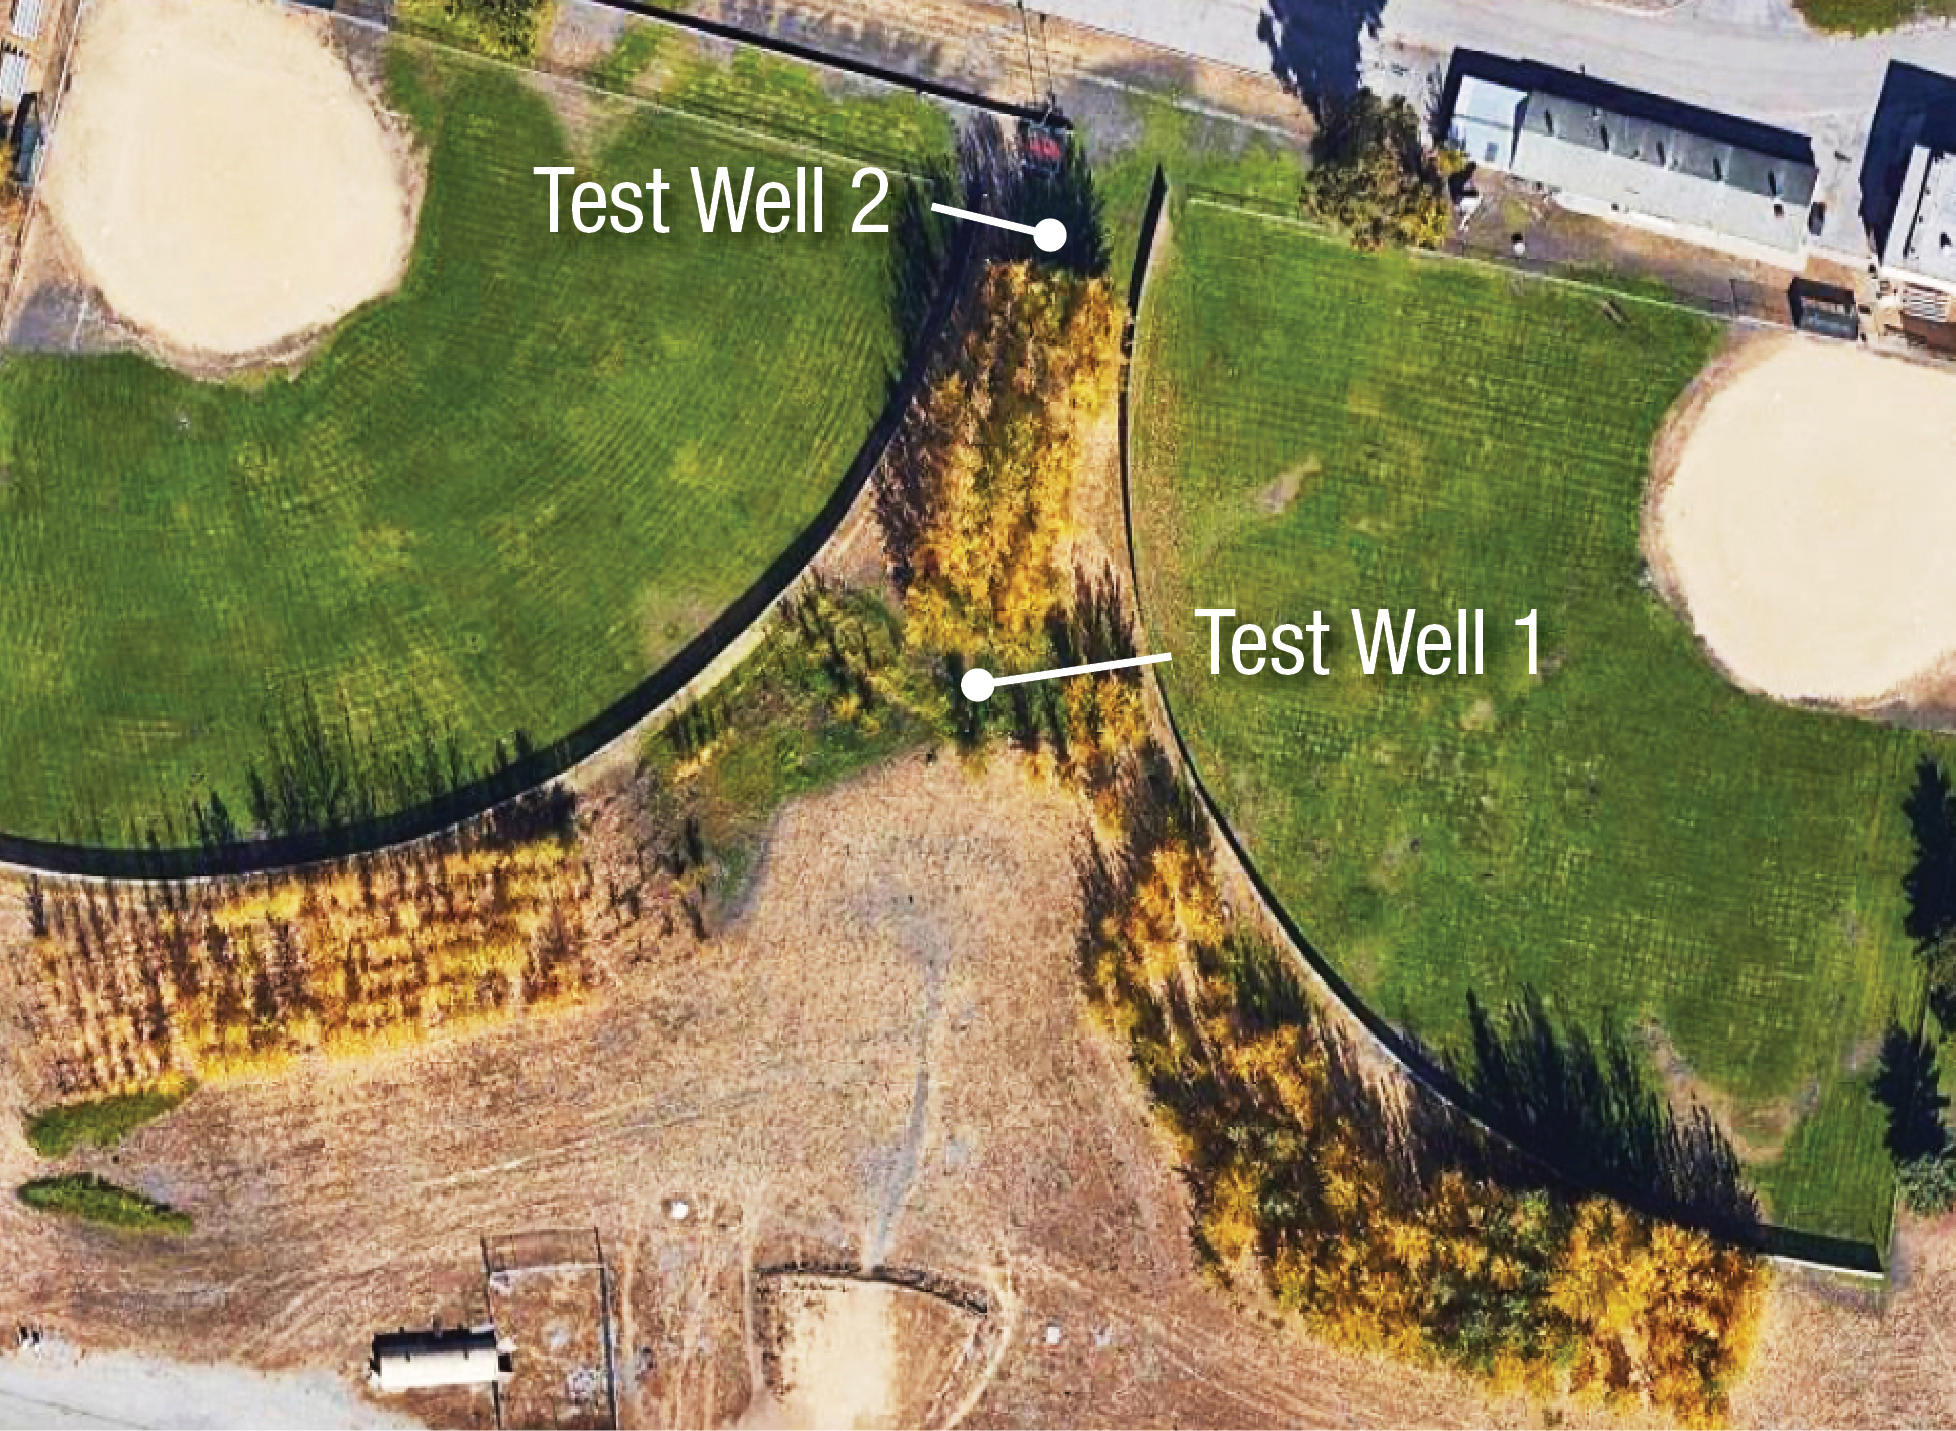 Arial view of Test well 1 and 2 in between two baseball fields.